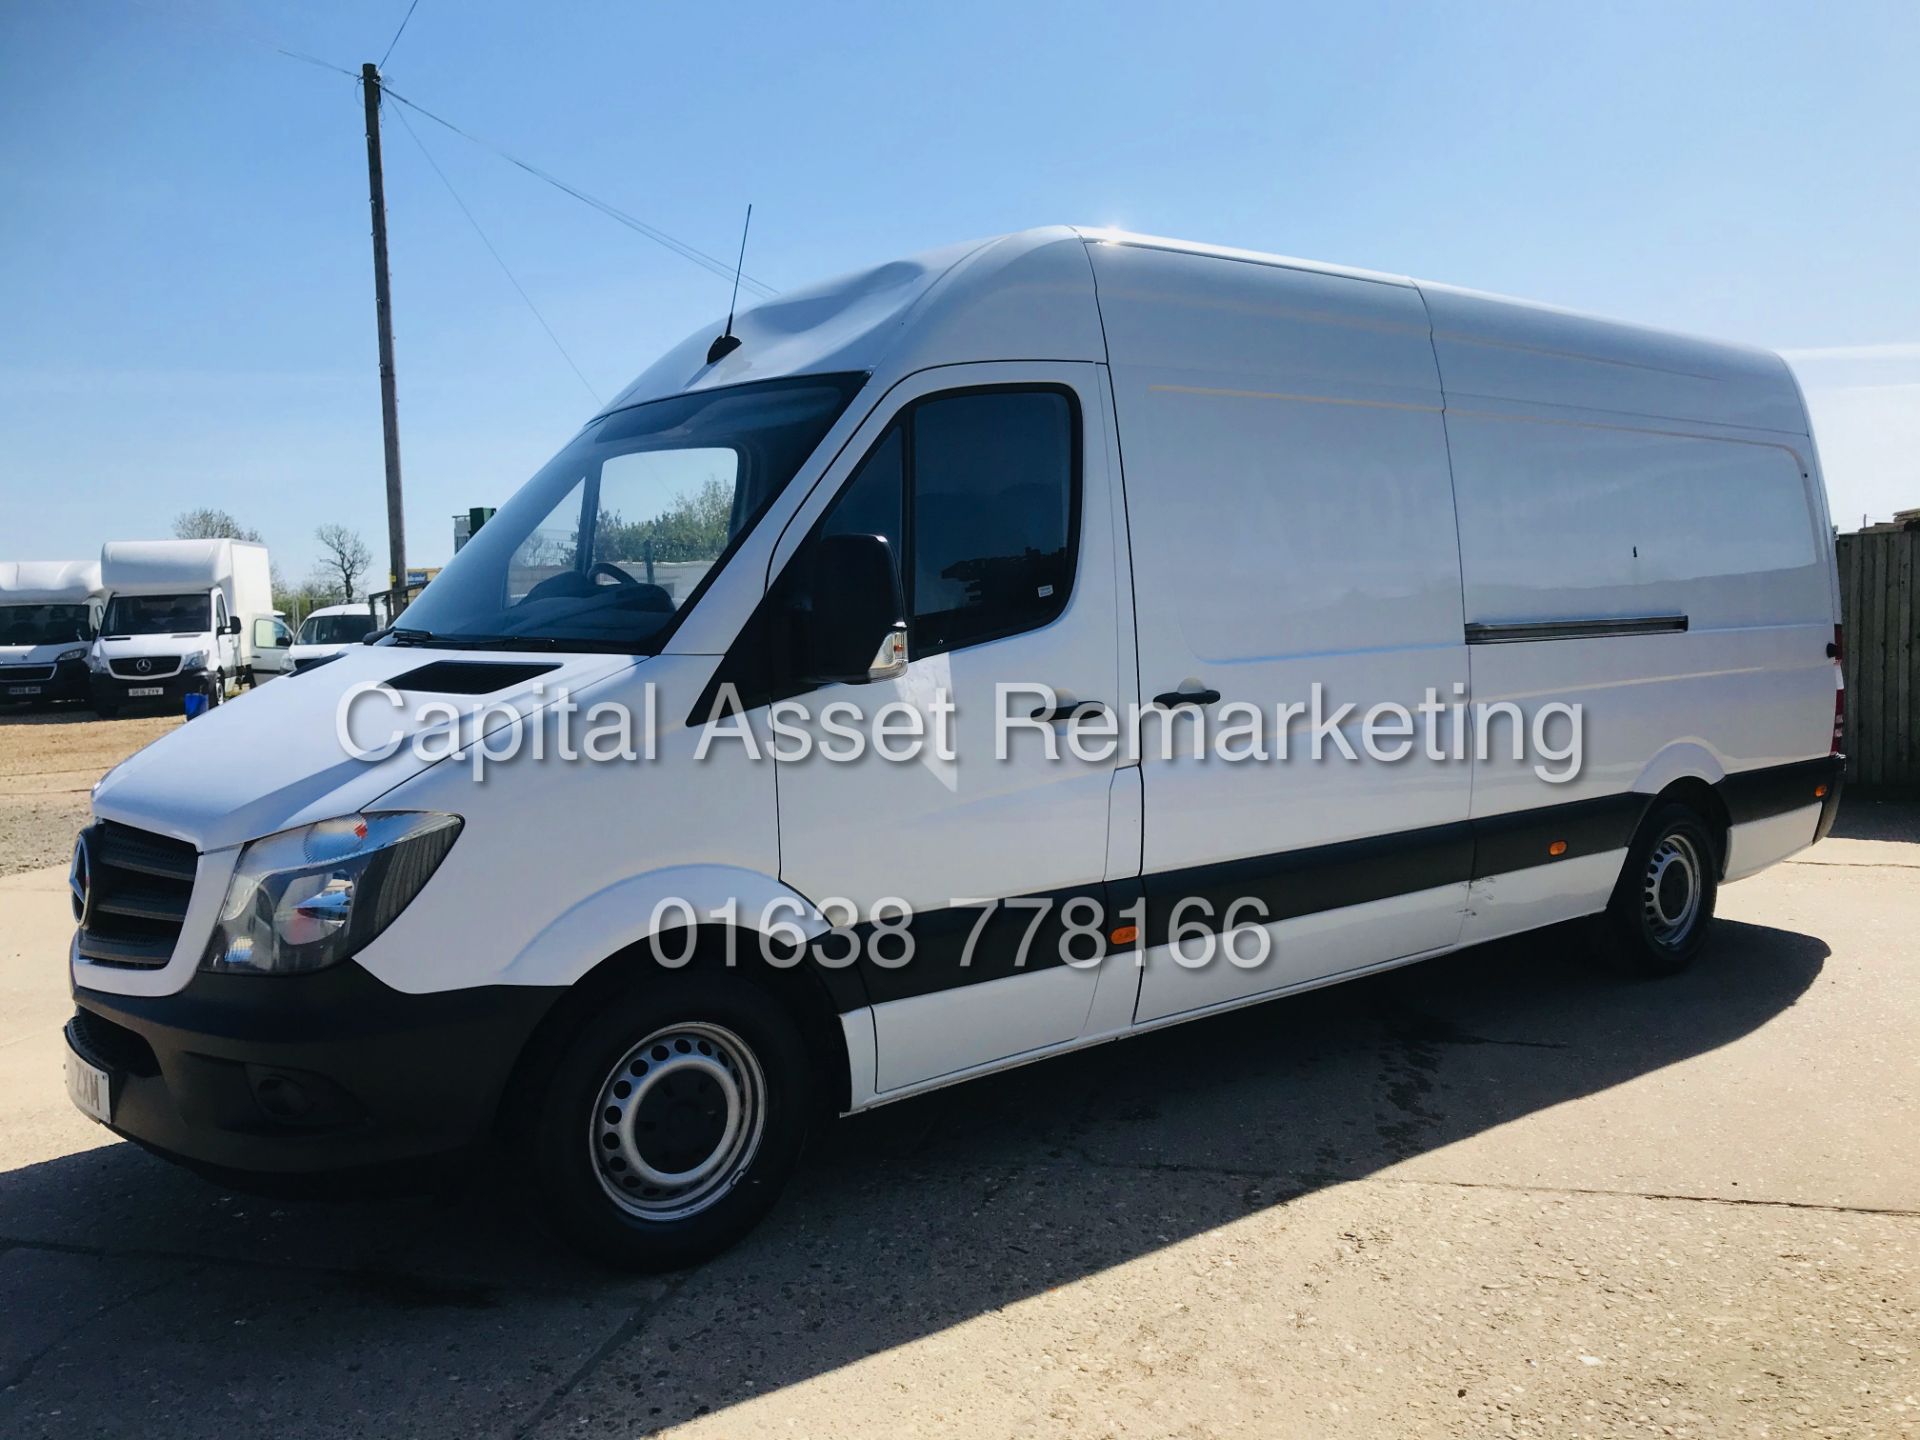 On Sale MERCEDES SPRINTER 313CDI "LWB" 4.2MTR WITH INTERNAL ELECTRIC TAIL LIFT / RAMP (16 REG) MOTOx - Image 6 of 25